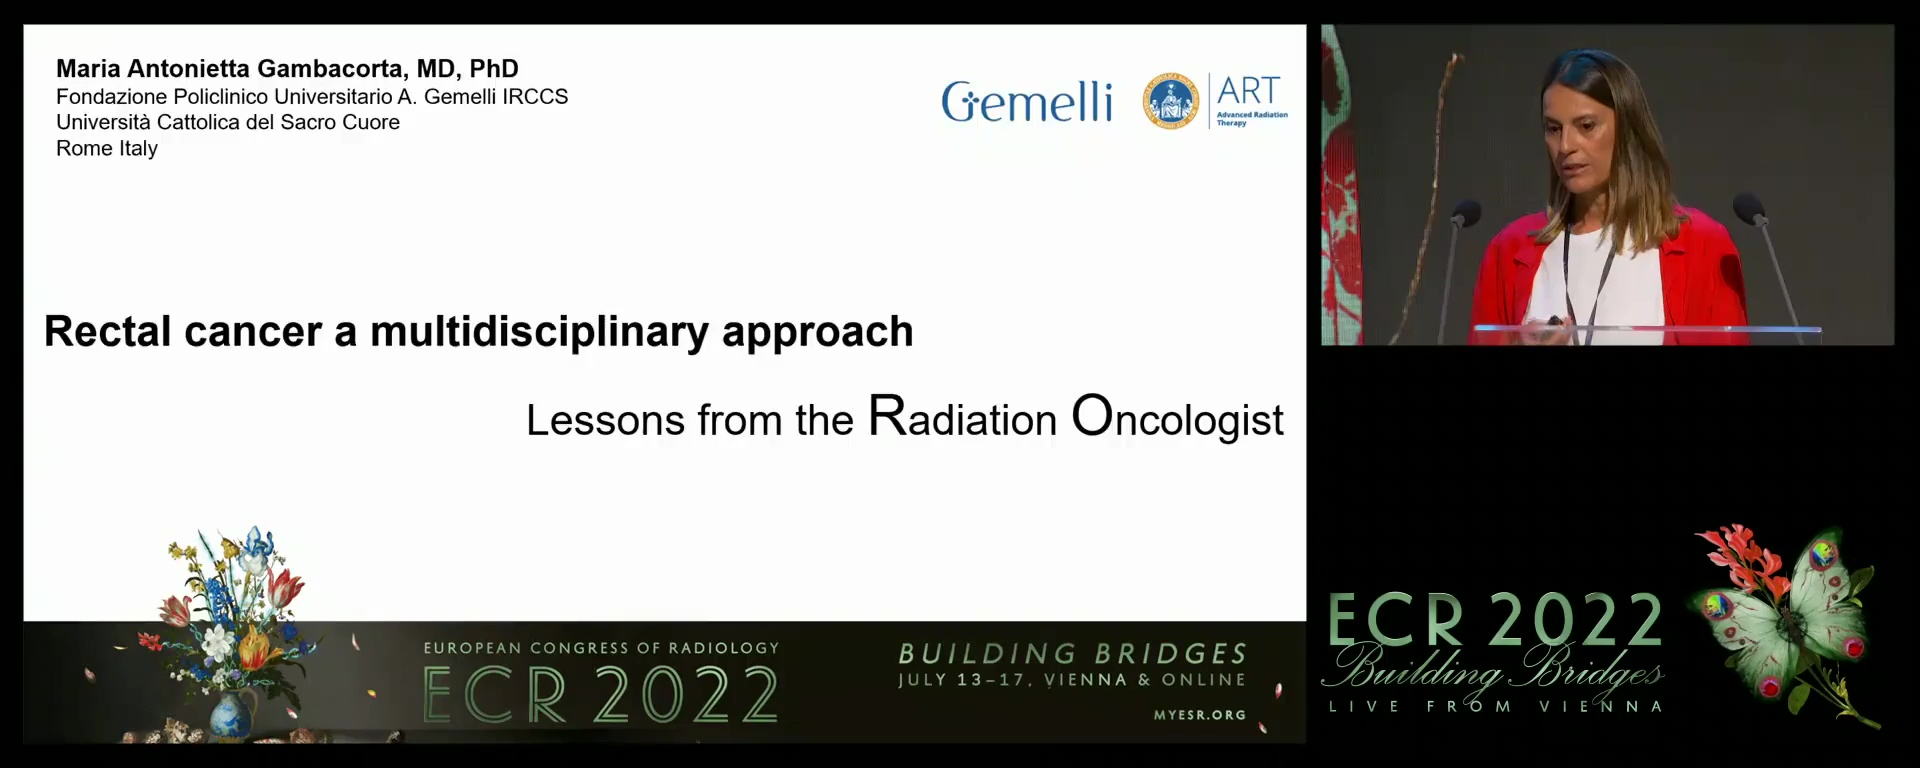 Lessons from the radiation oncologist